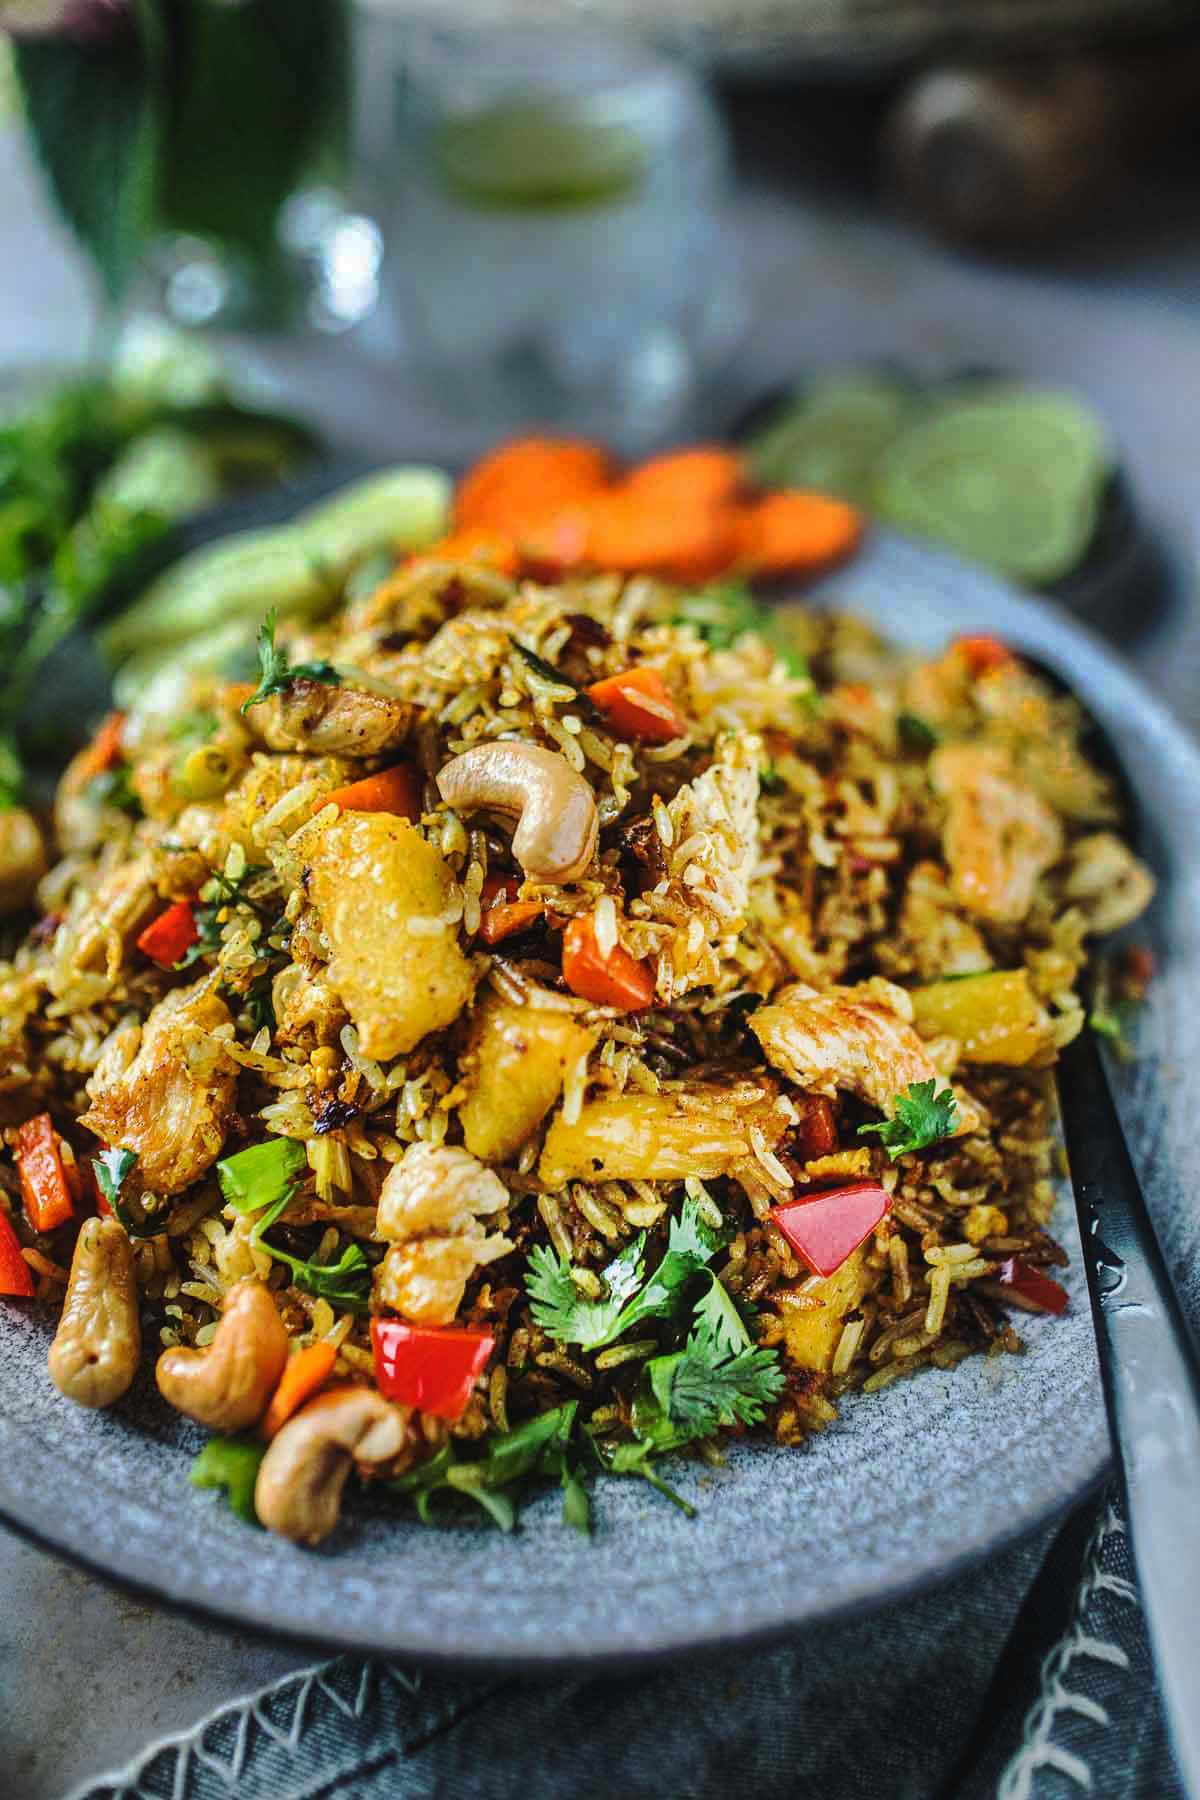 This Pineapple Fried Rice is easy to make in 30 minutes with your choice of chicken, shrimp or crispy tofu. A tasty Thai meal in minutes!